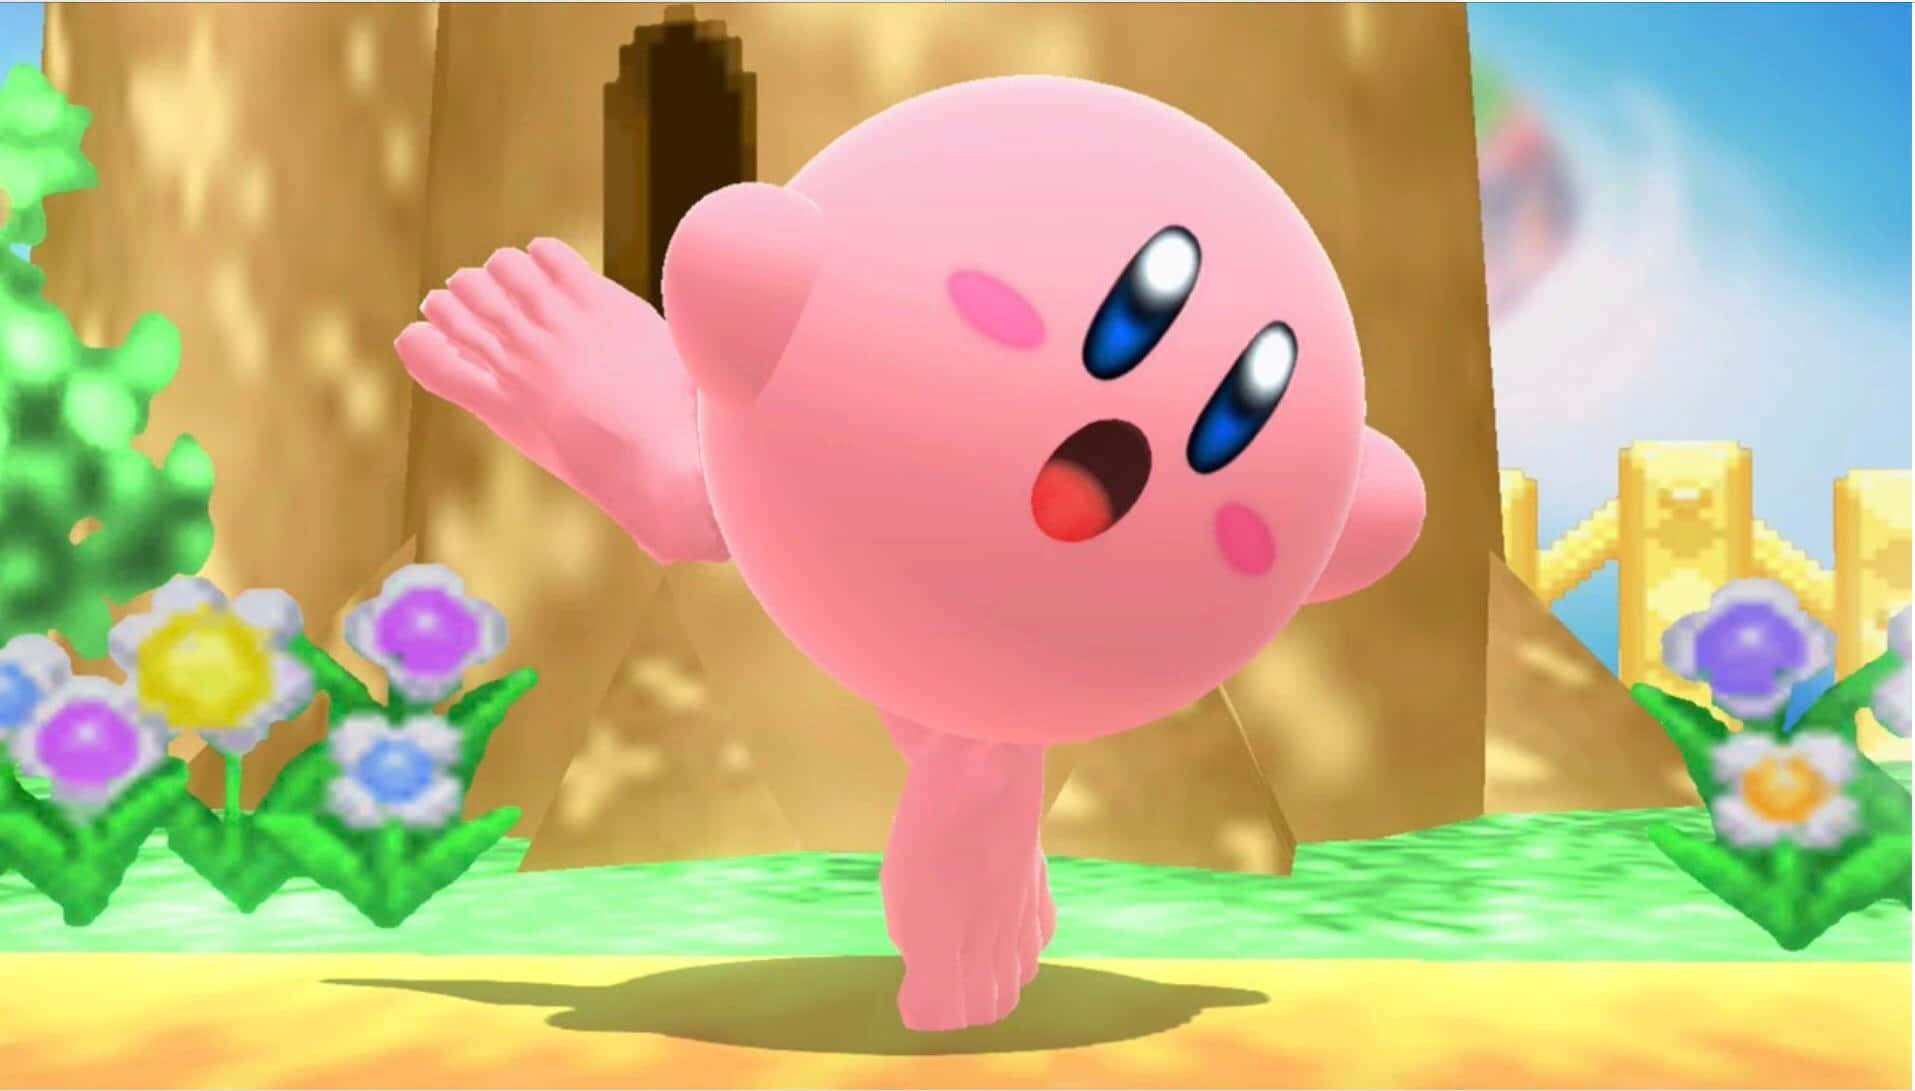 “Kirby, the popular Nintendo video game character”.